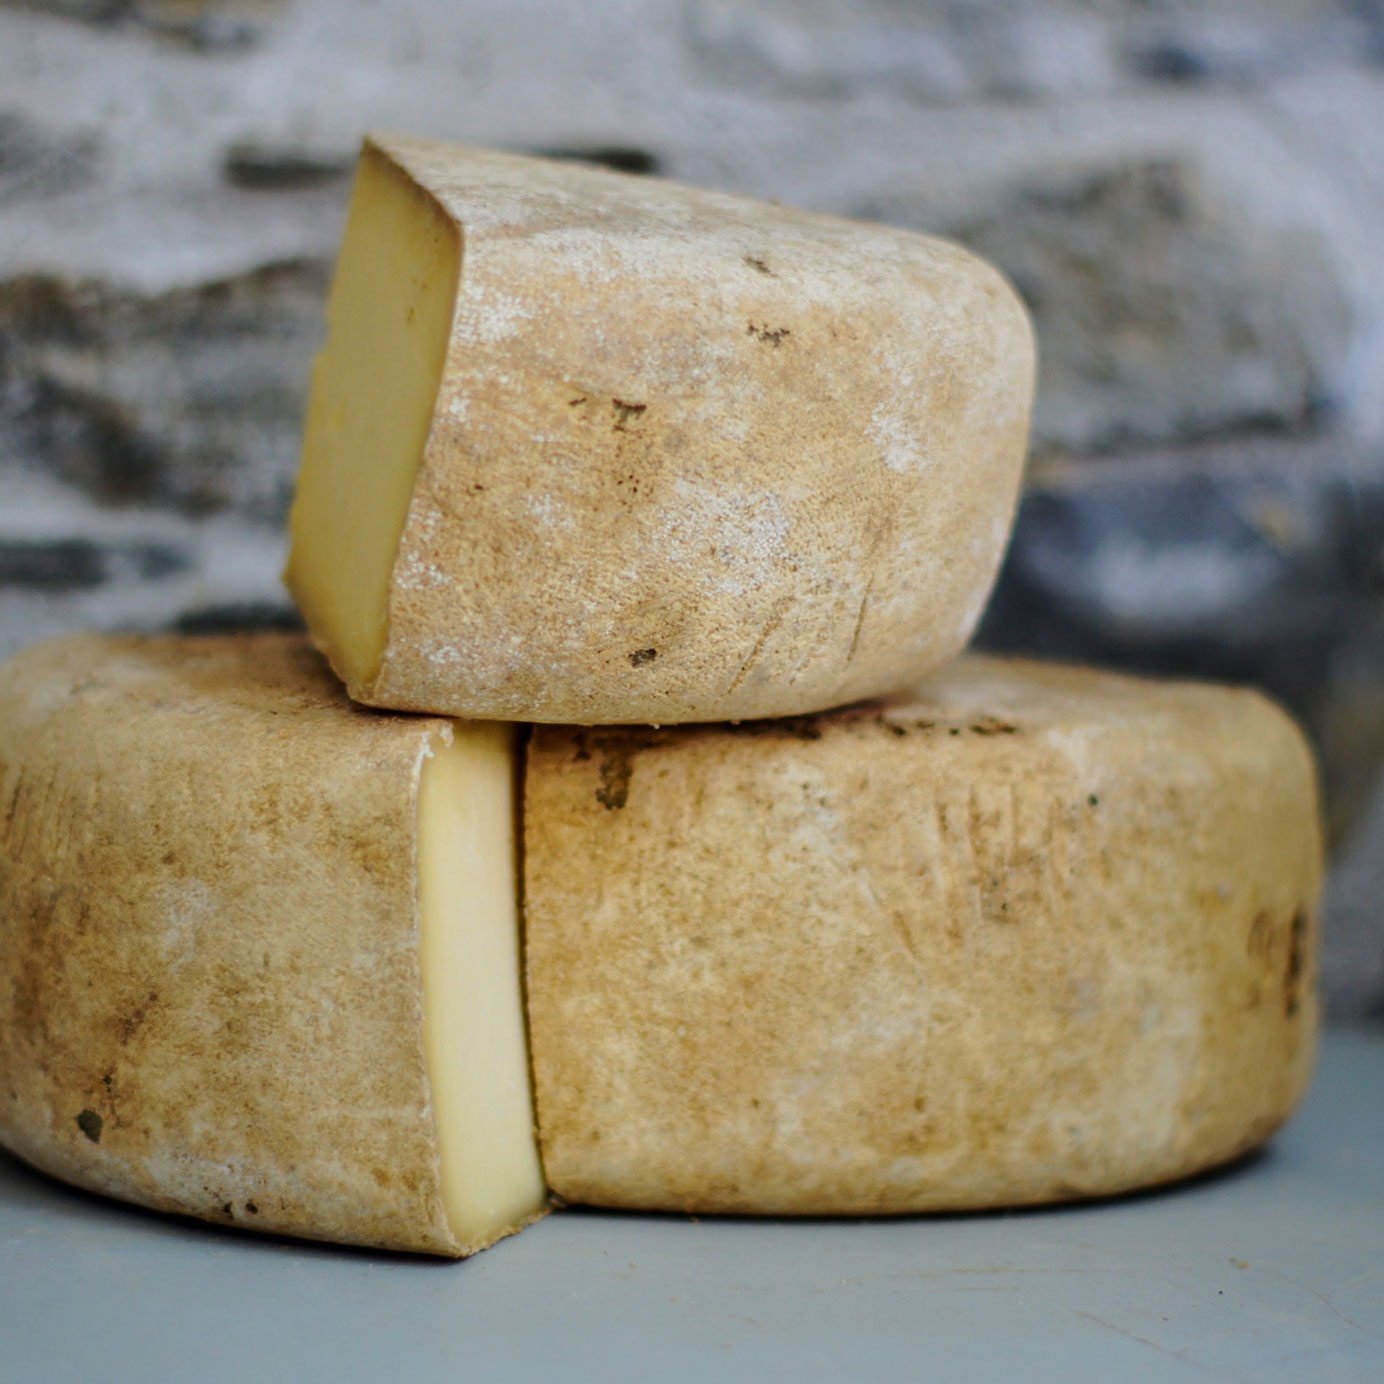 Eight Cheese Trends to Watch in 2019